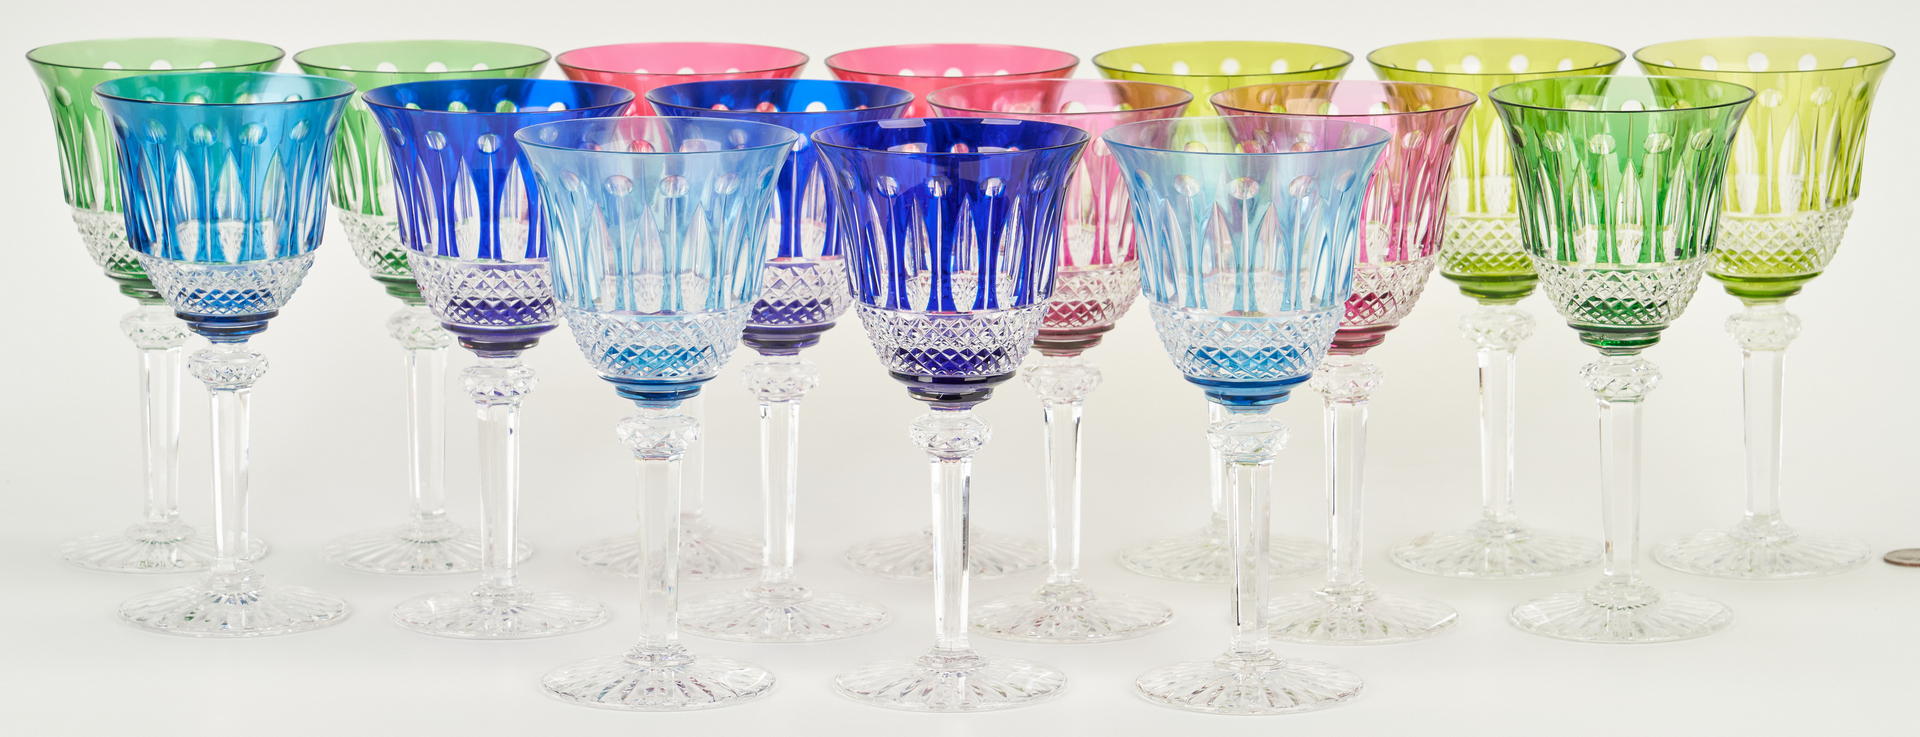 Lot 470: 16 St. Louis Crystal Goblets, Multicolored